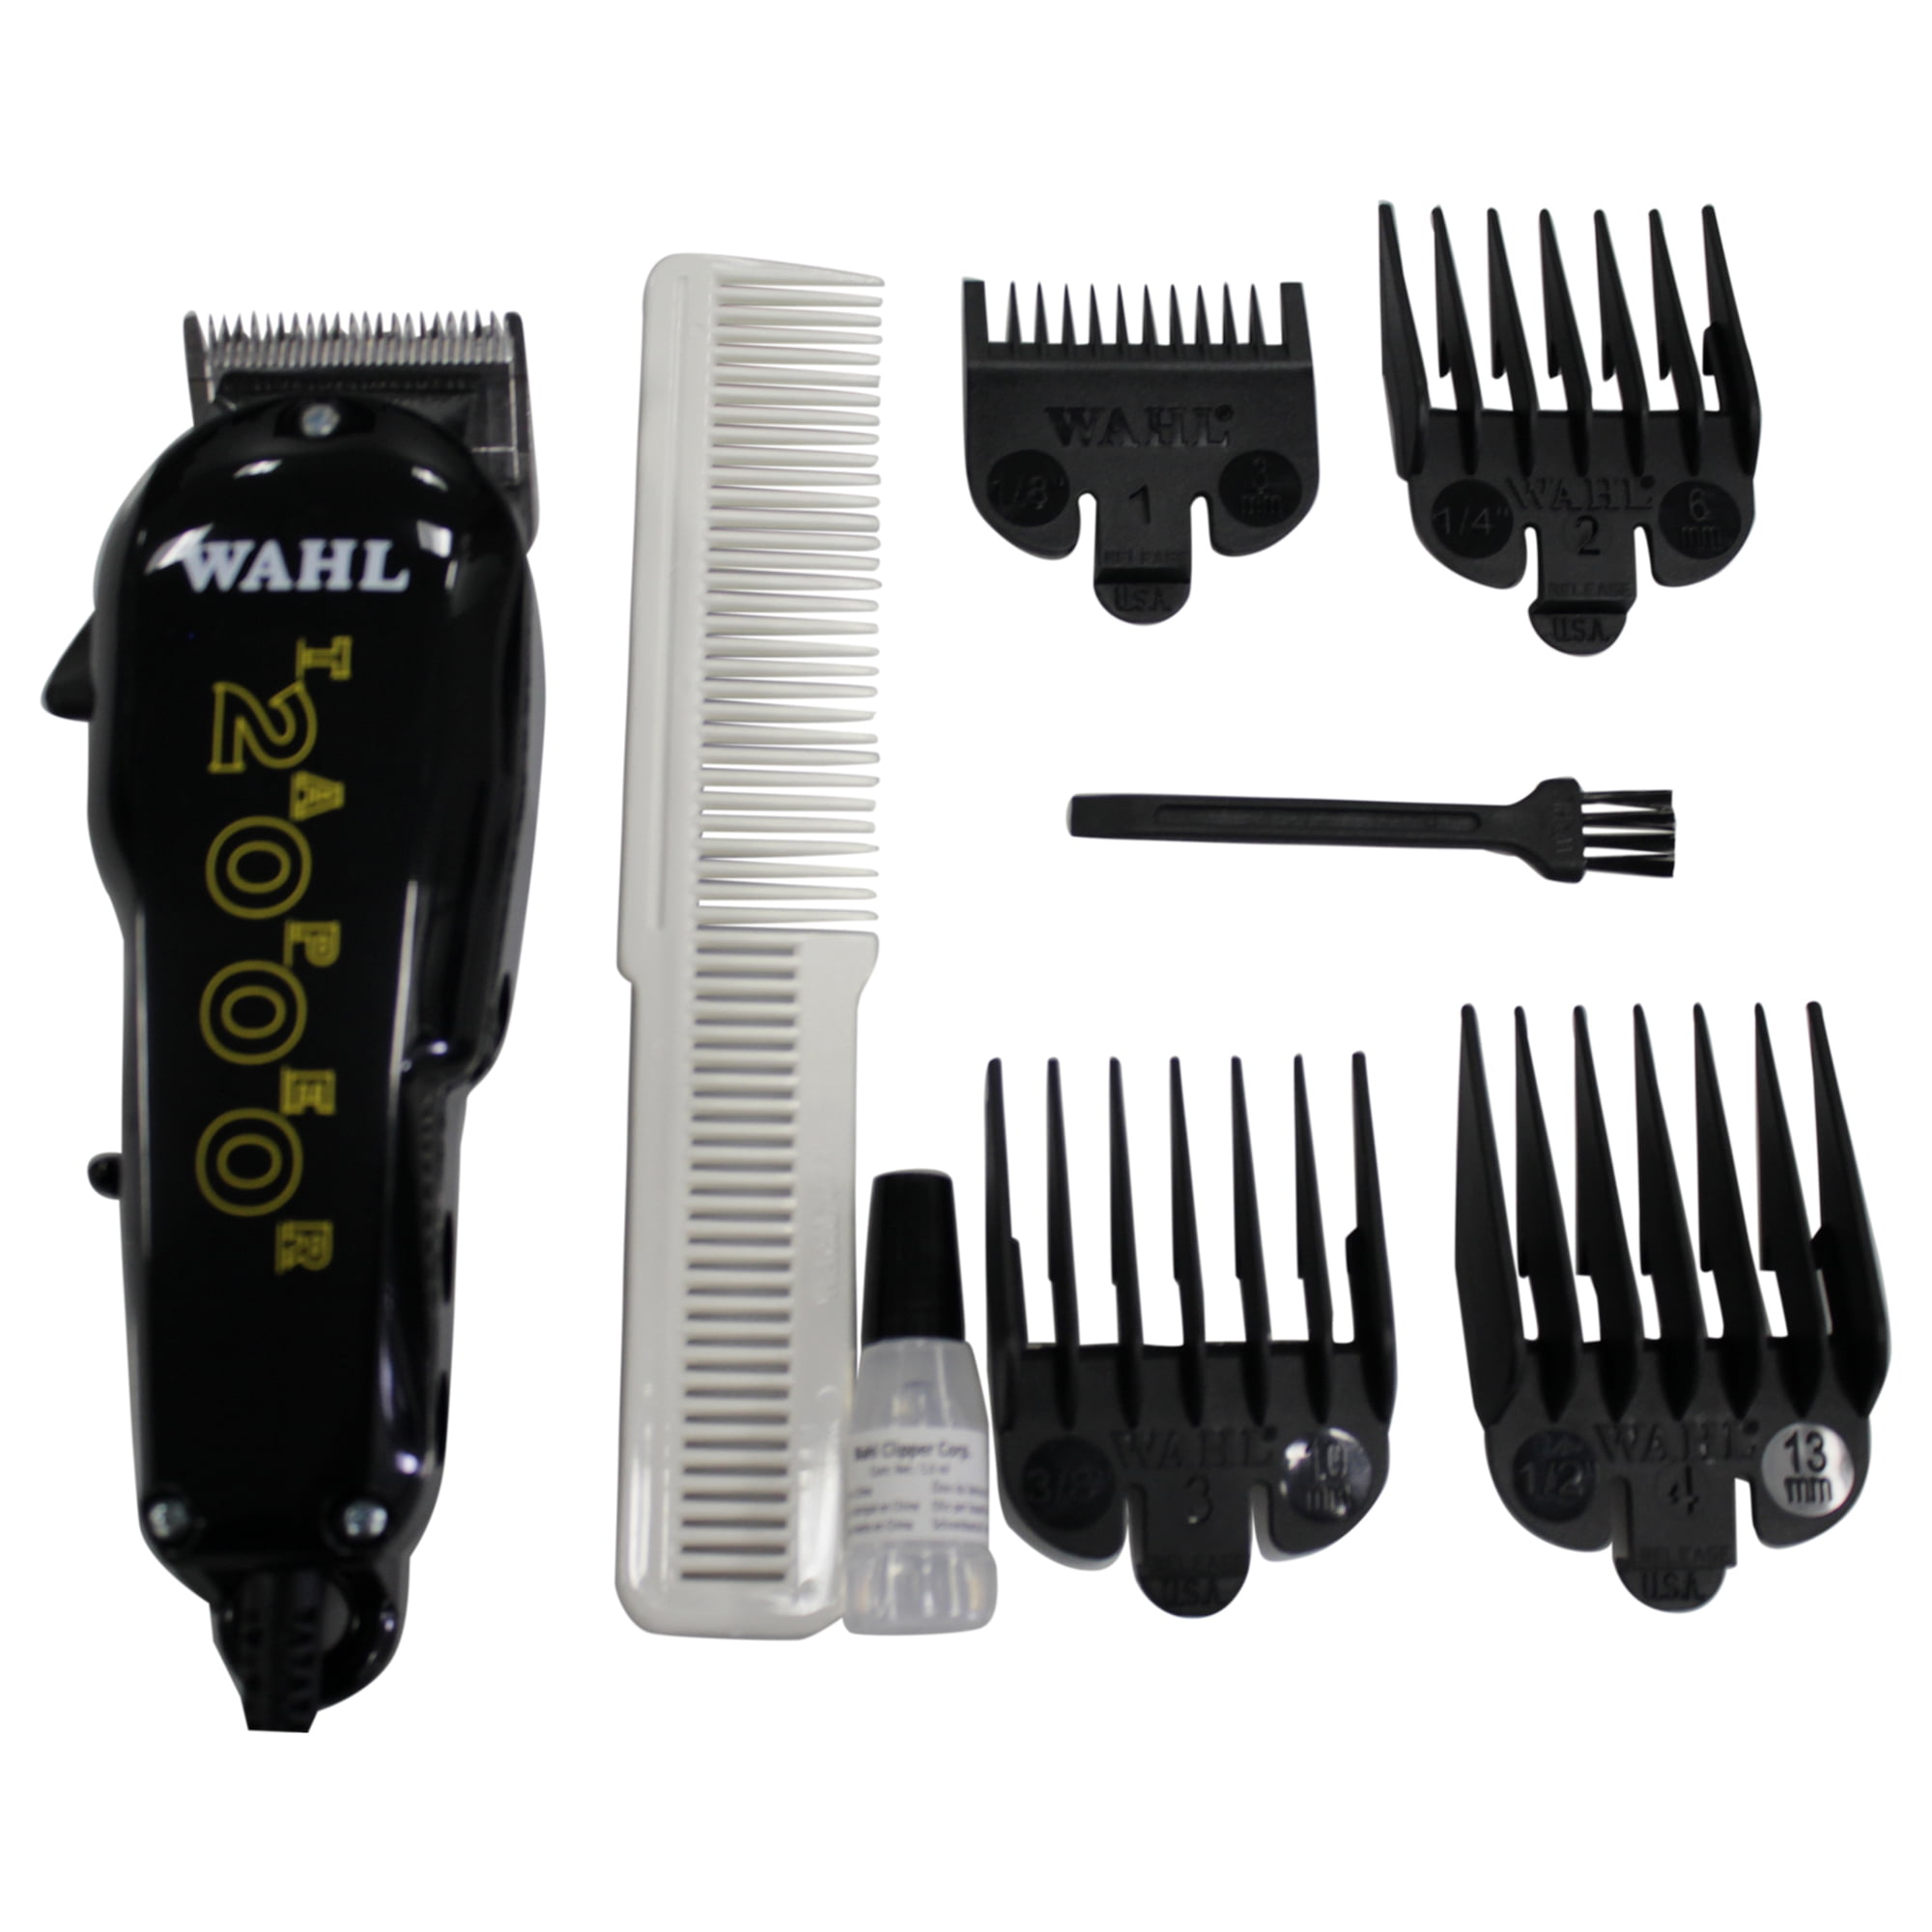 wahl 2000 hair clippers